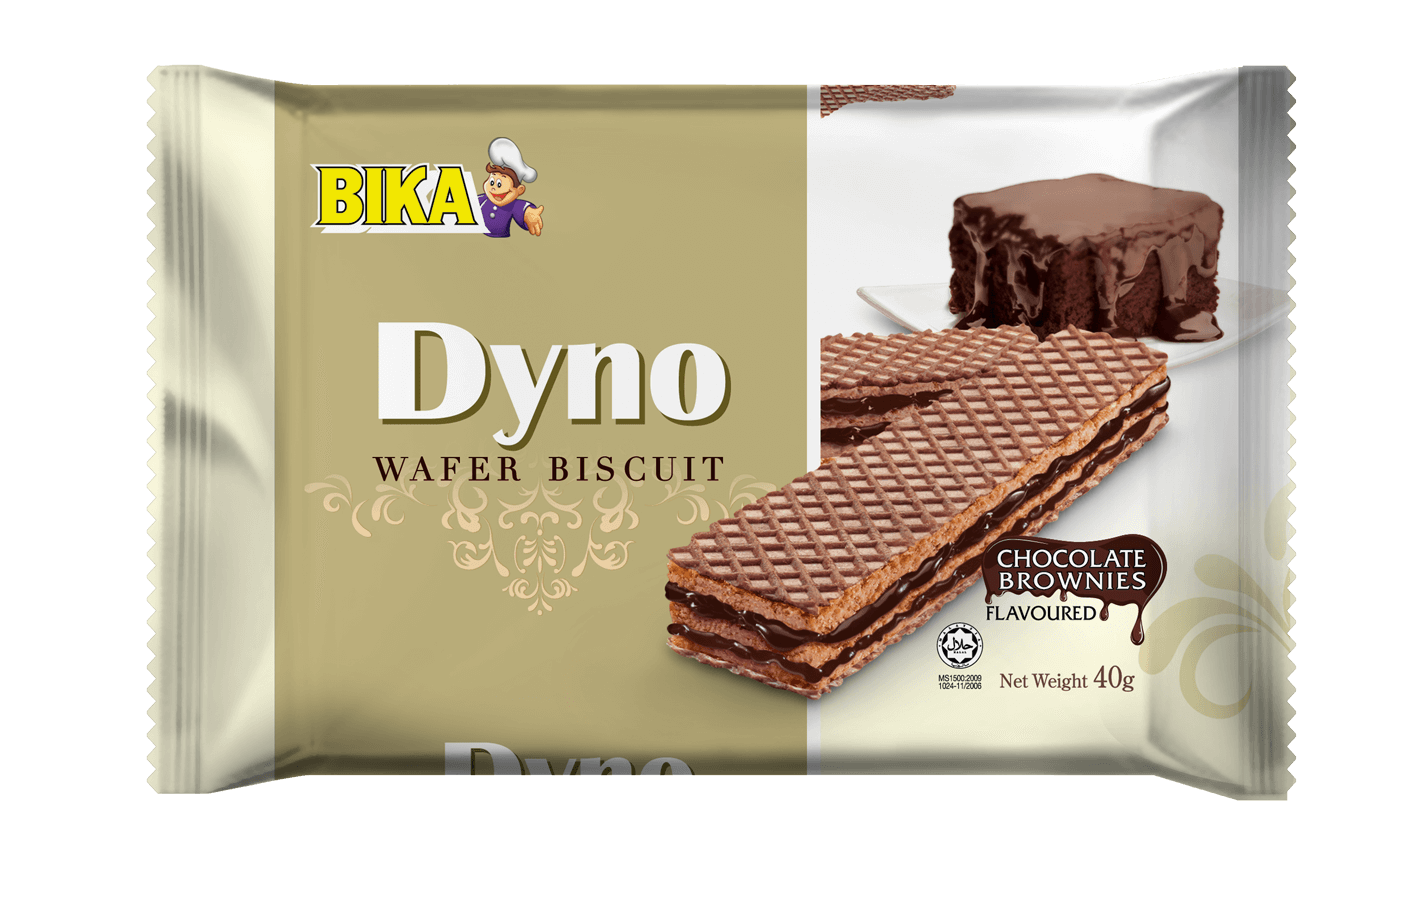 Dyno Wafer Biscuit (Chocolate Brownies Flavoured) .